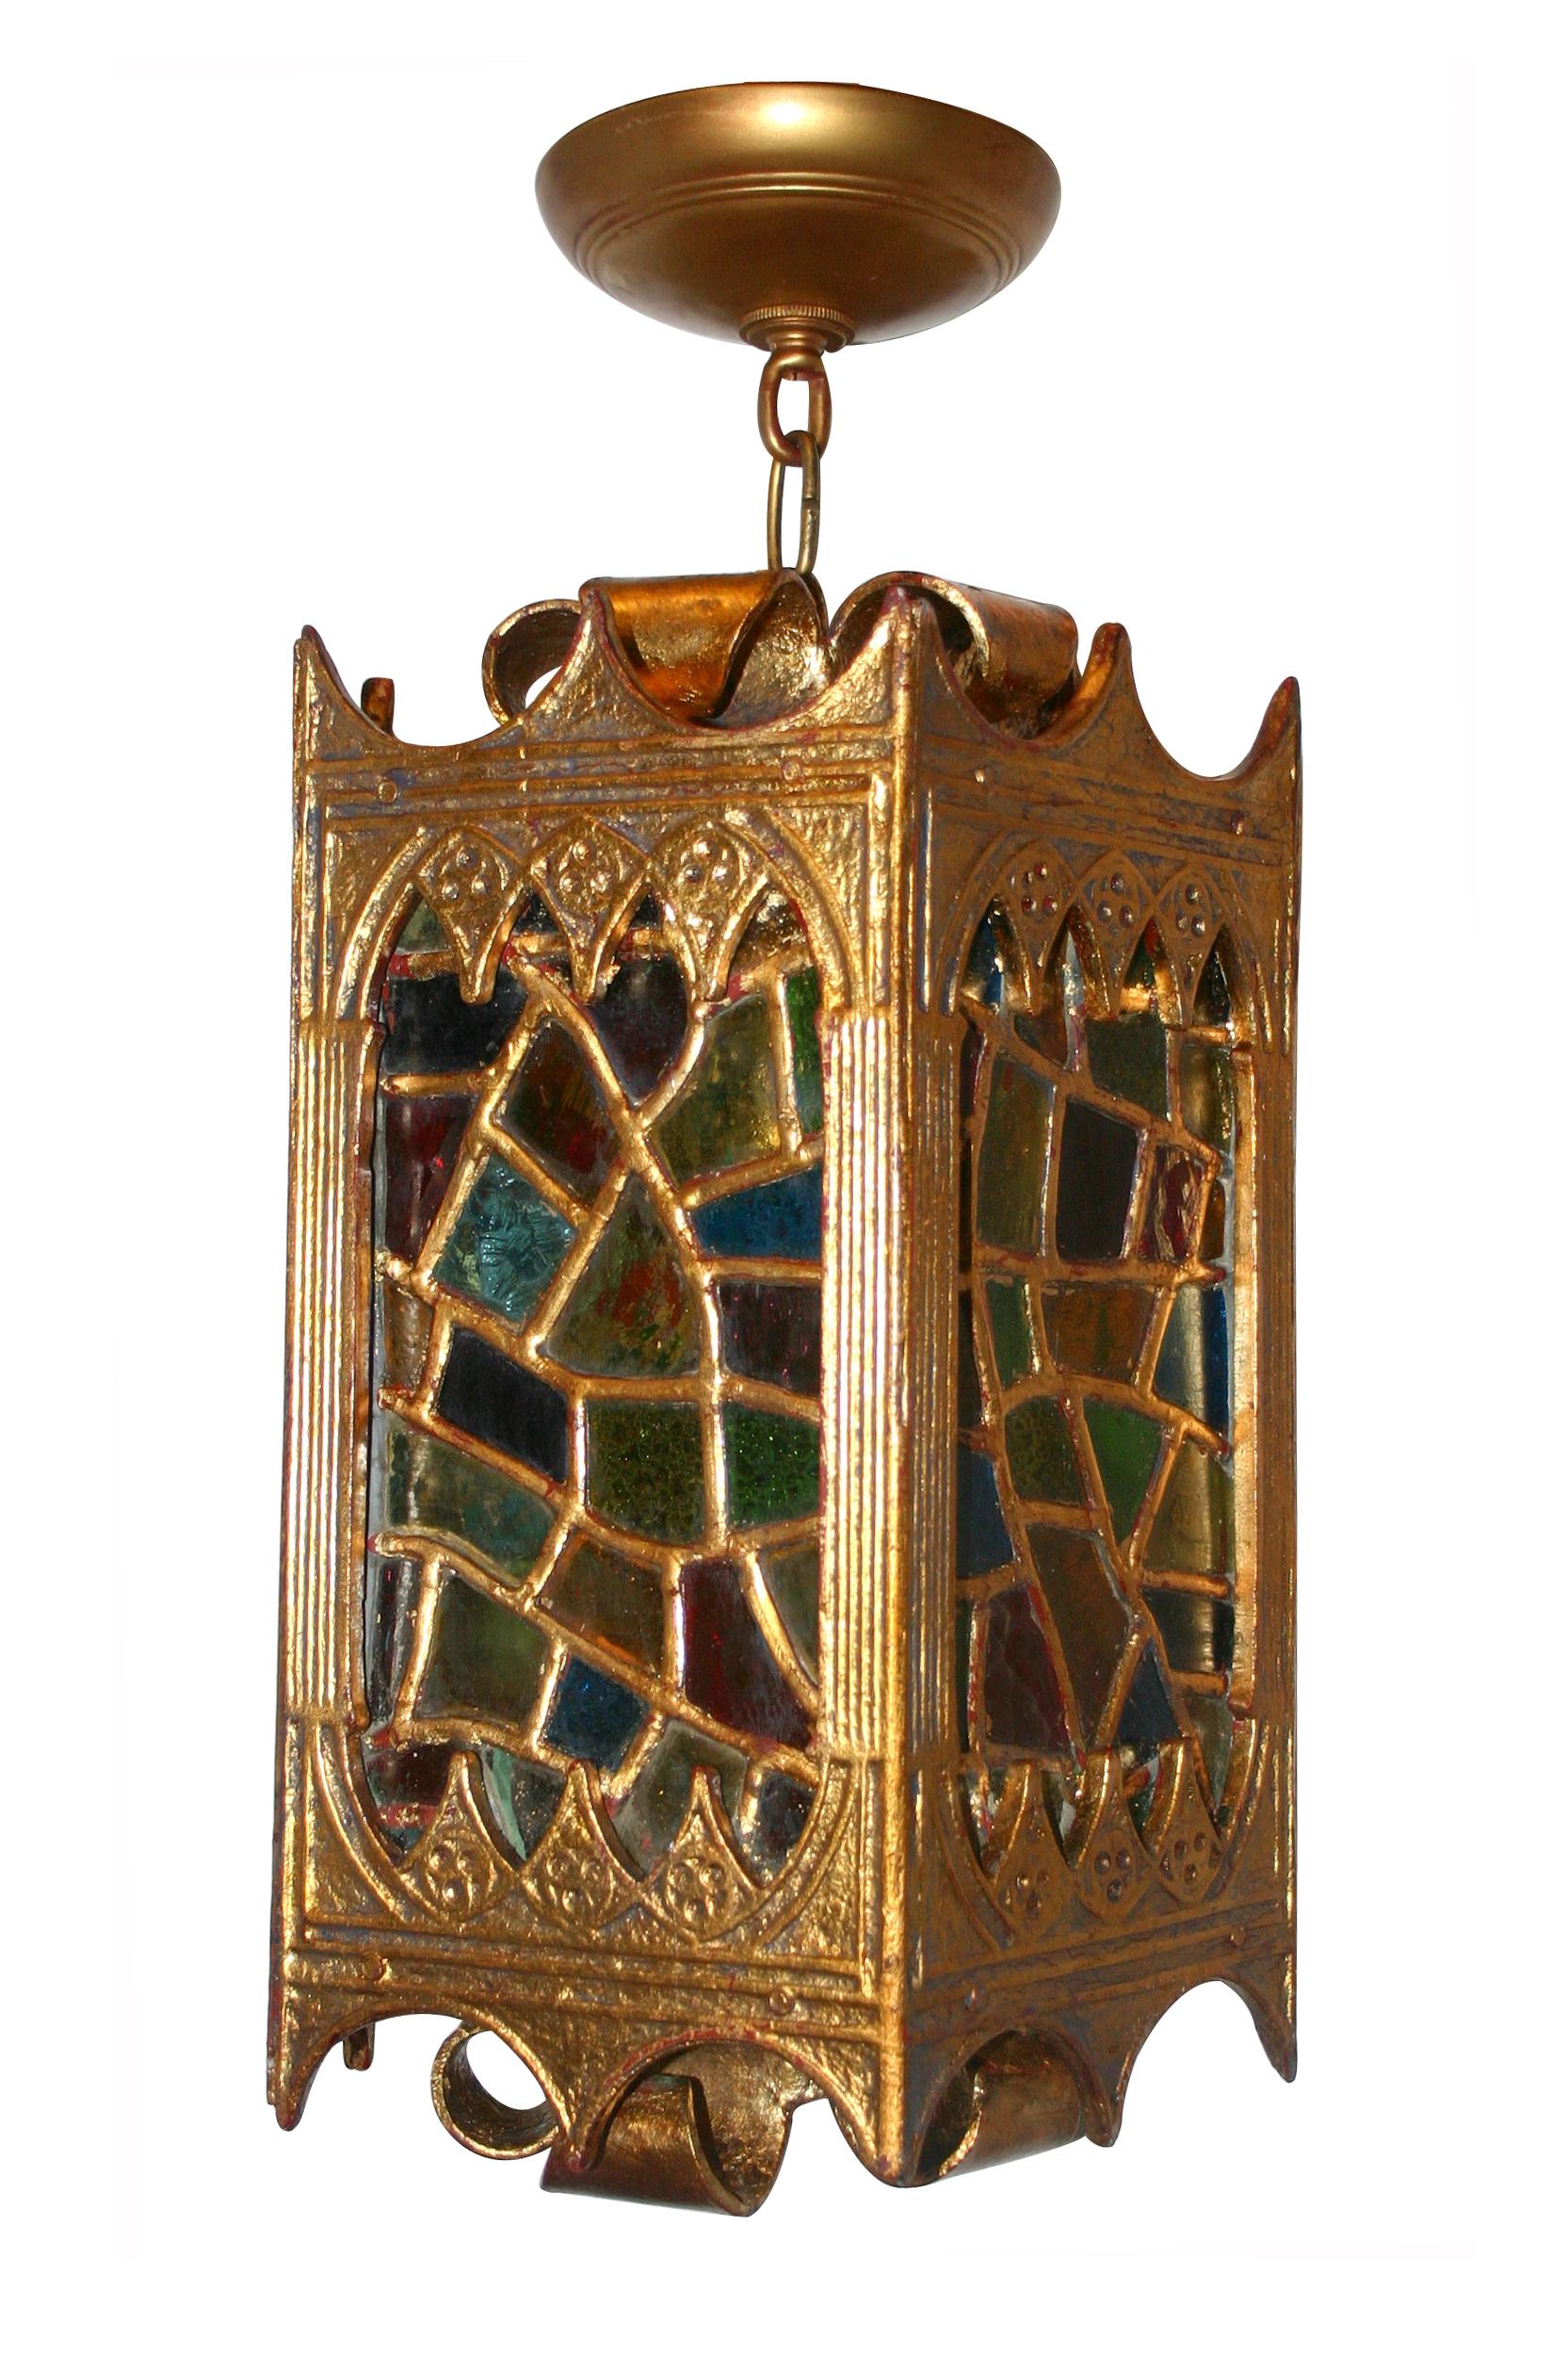 Pair of circa 1940's French gilt metal lanterns with leaded glass insets. Sold individually.

Measurements:
Height: 19